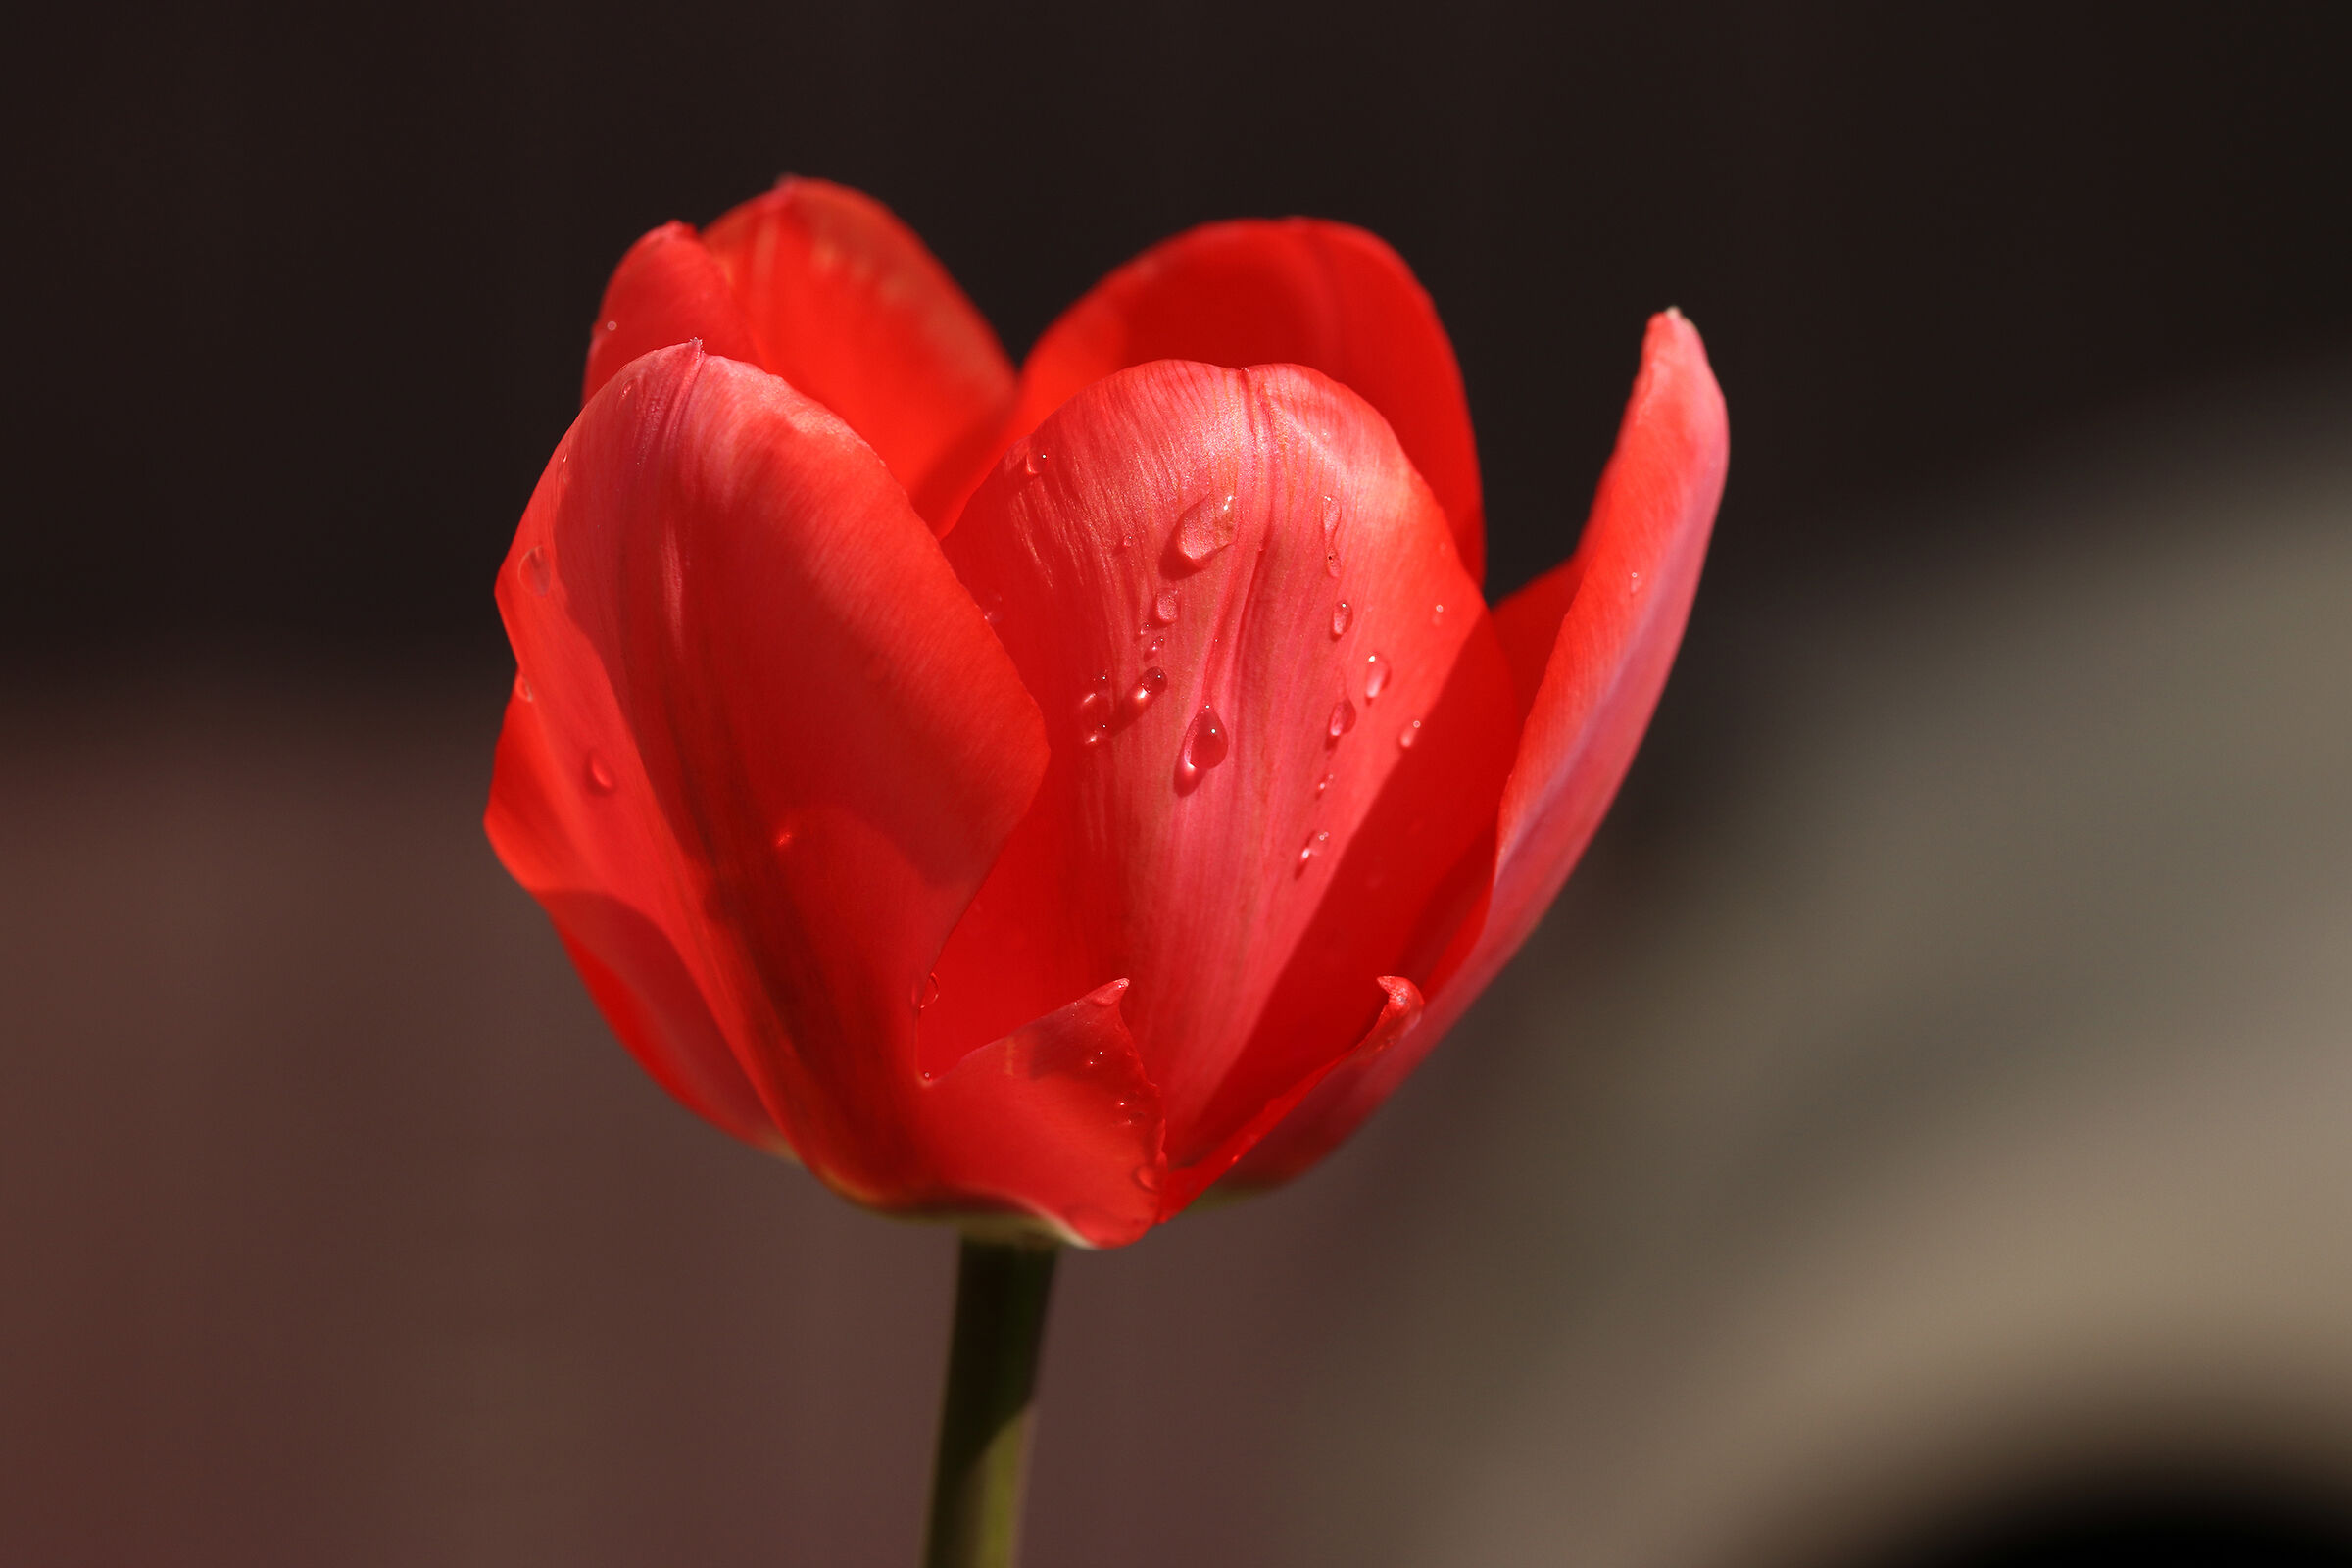 the first tulip in the garden...